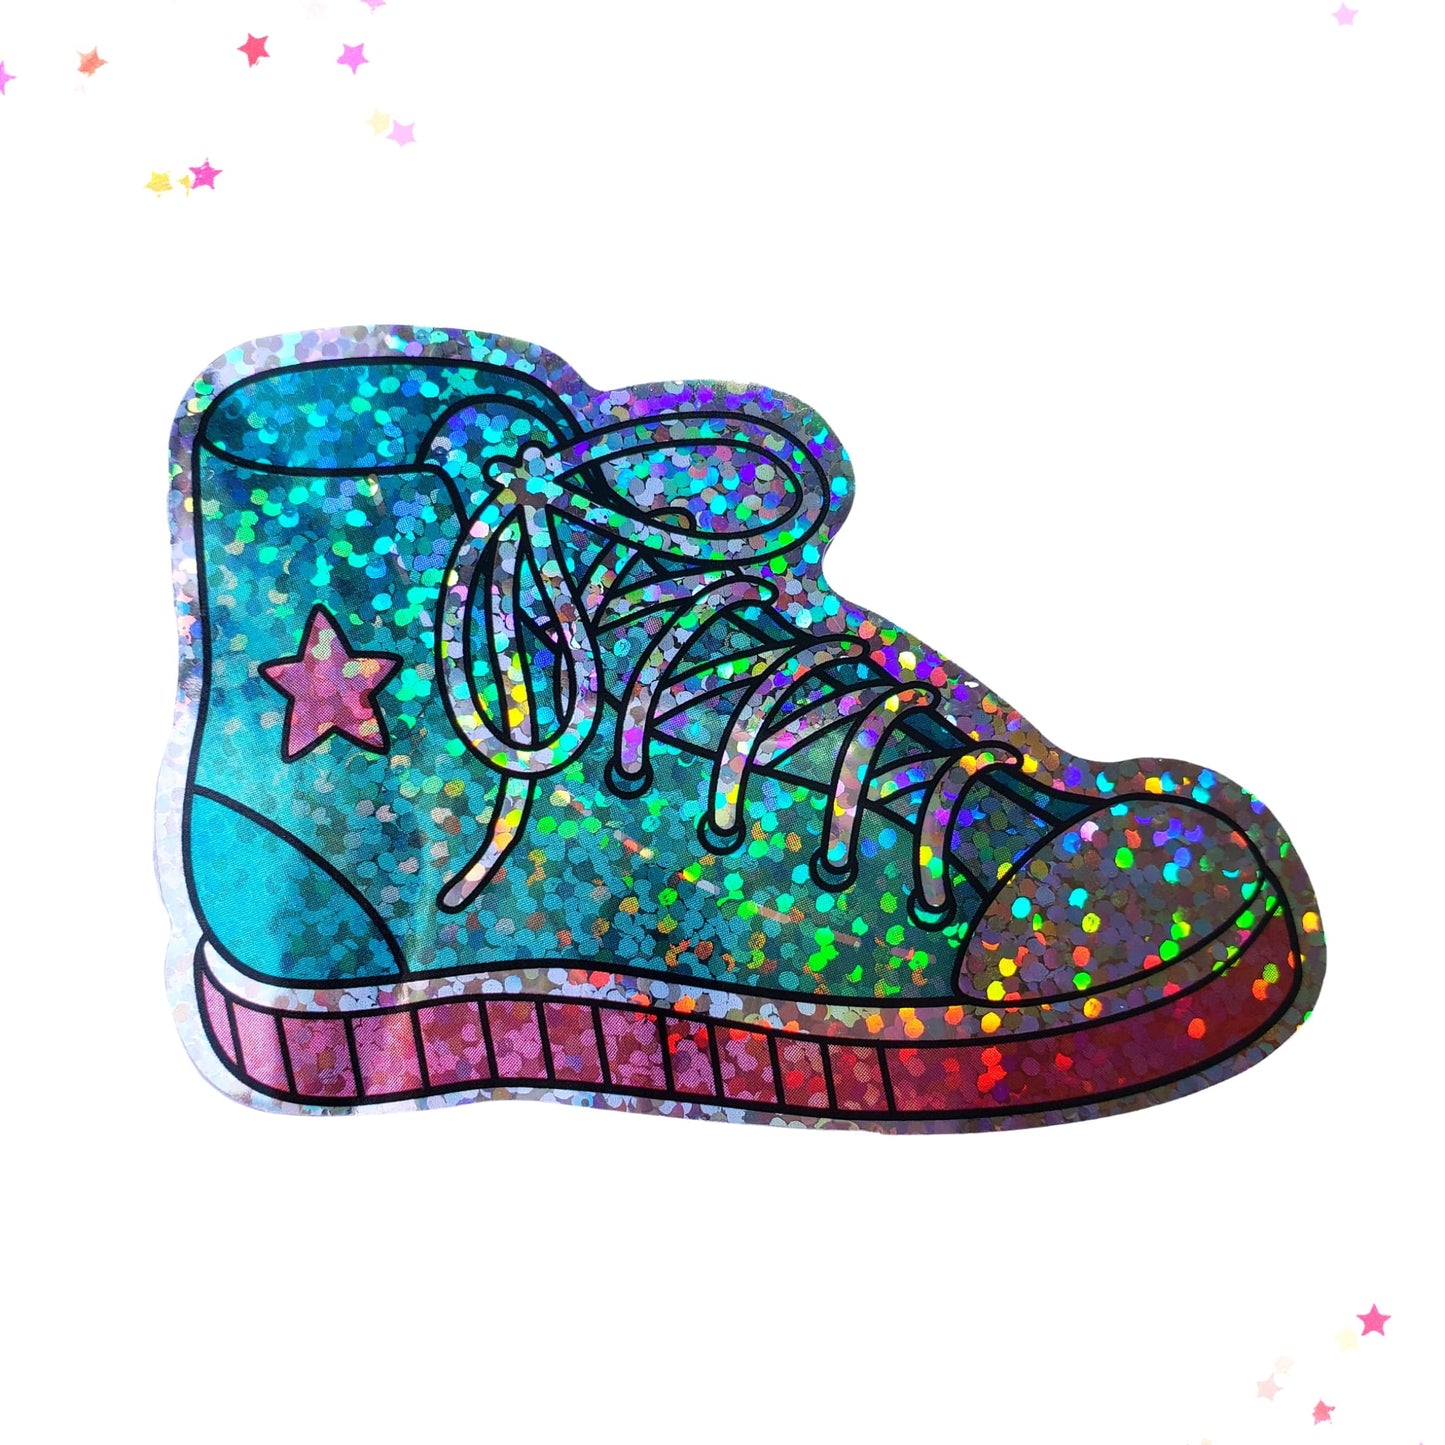 Premium Sticker - Sparkly Holographic Glitter Pink Star Turquoise Sneaker from Confetti Kitty, Only 2.00